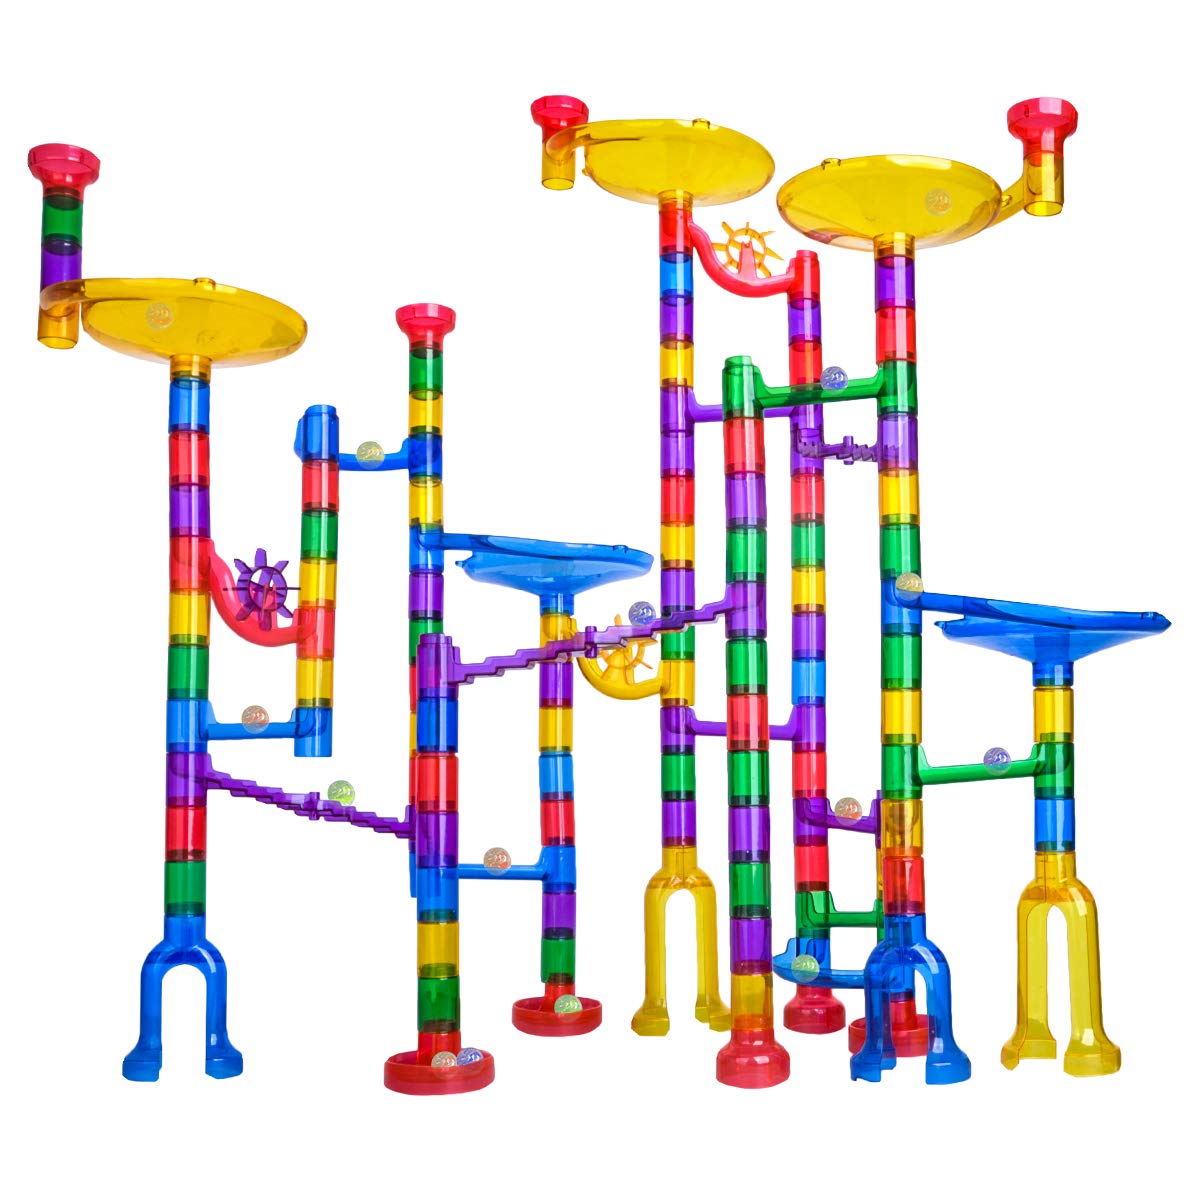 Review of Meland Marble Run - 122Pcs Marble Maze Game Building Toy for Kids